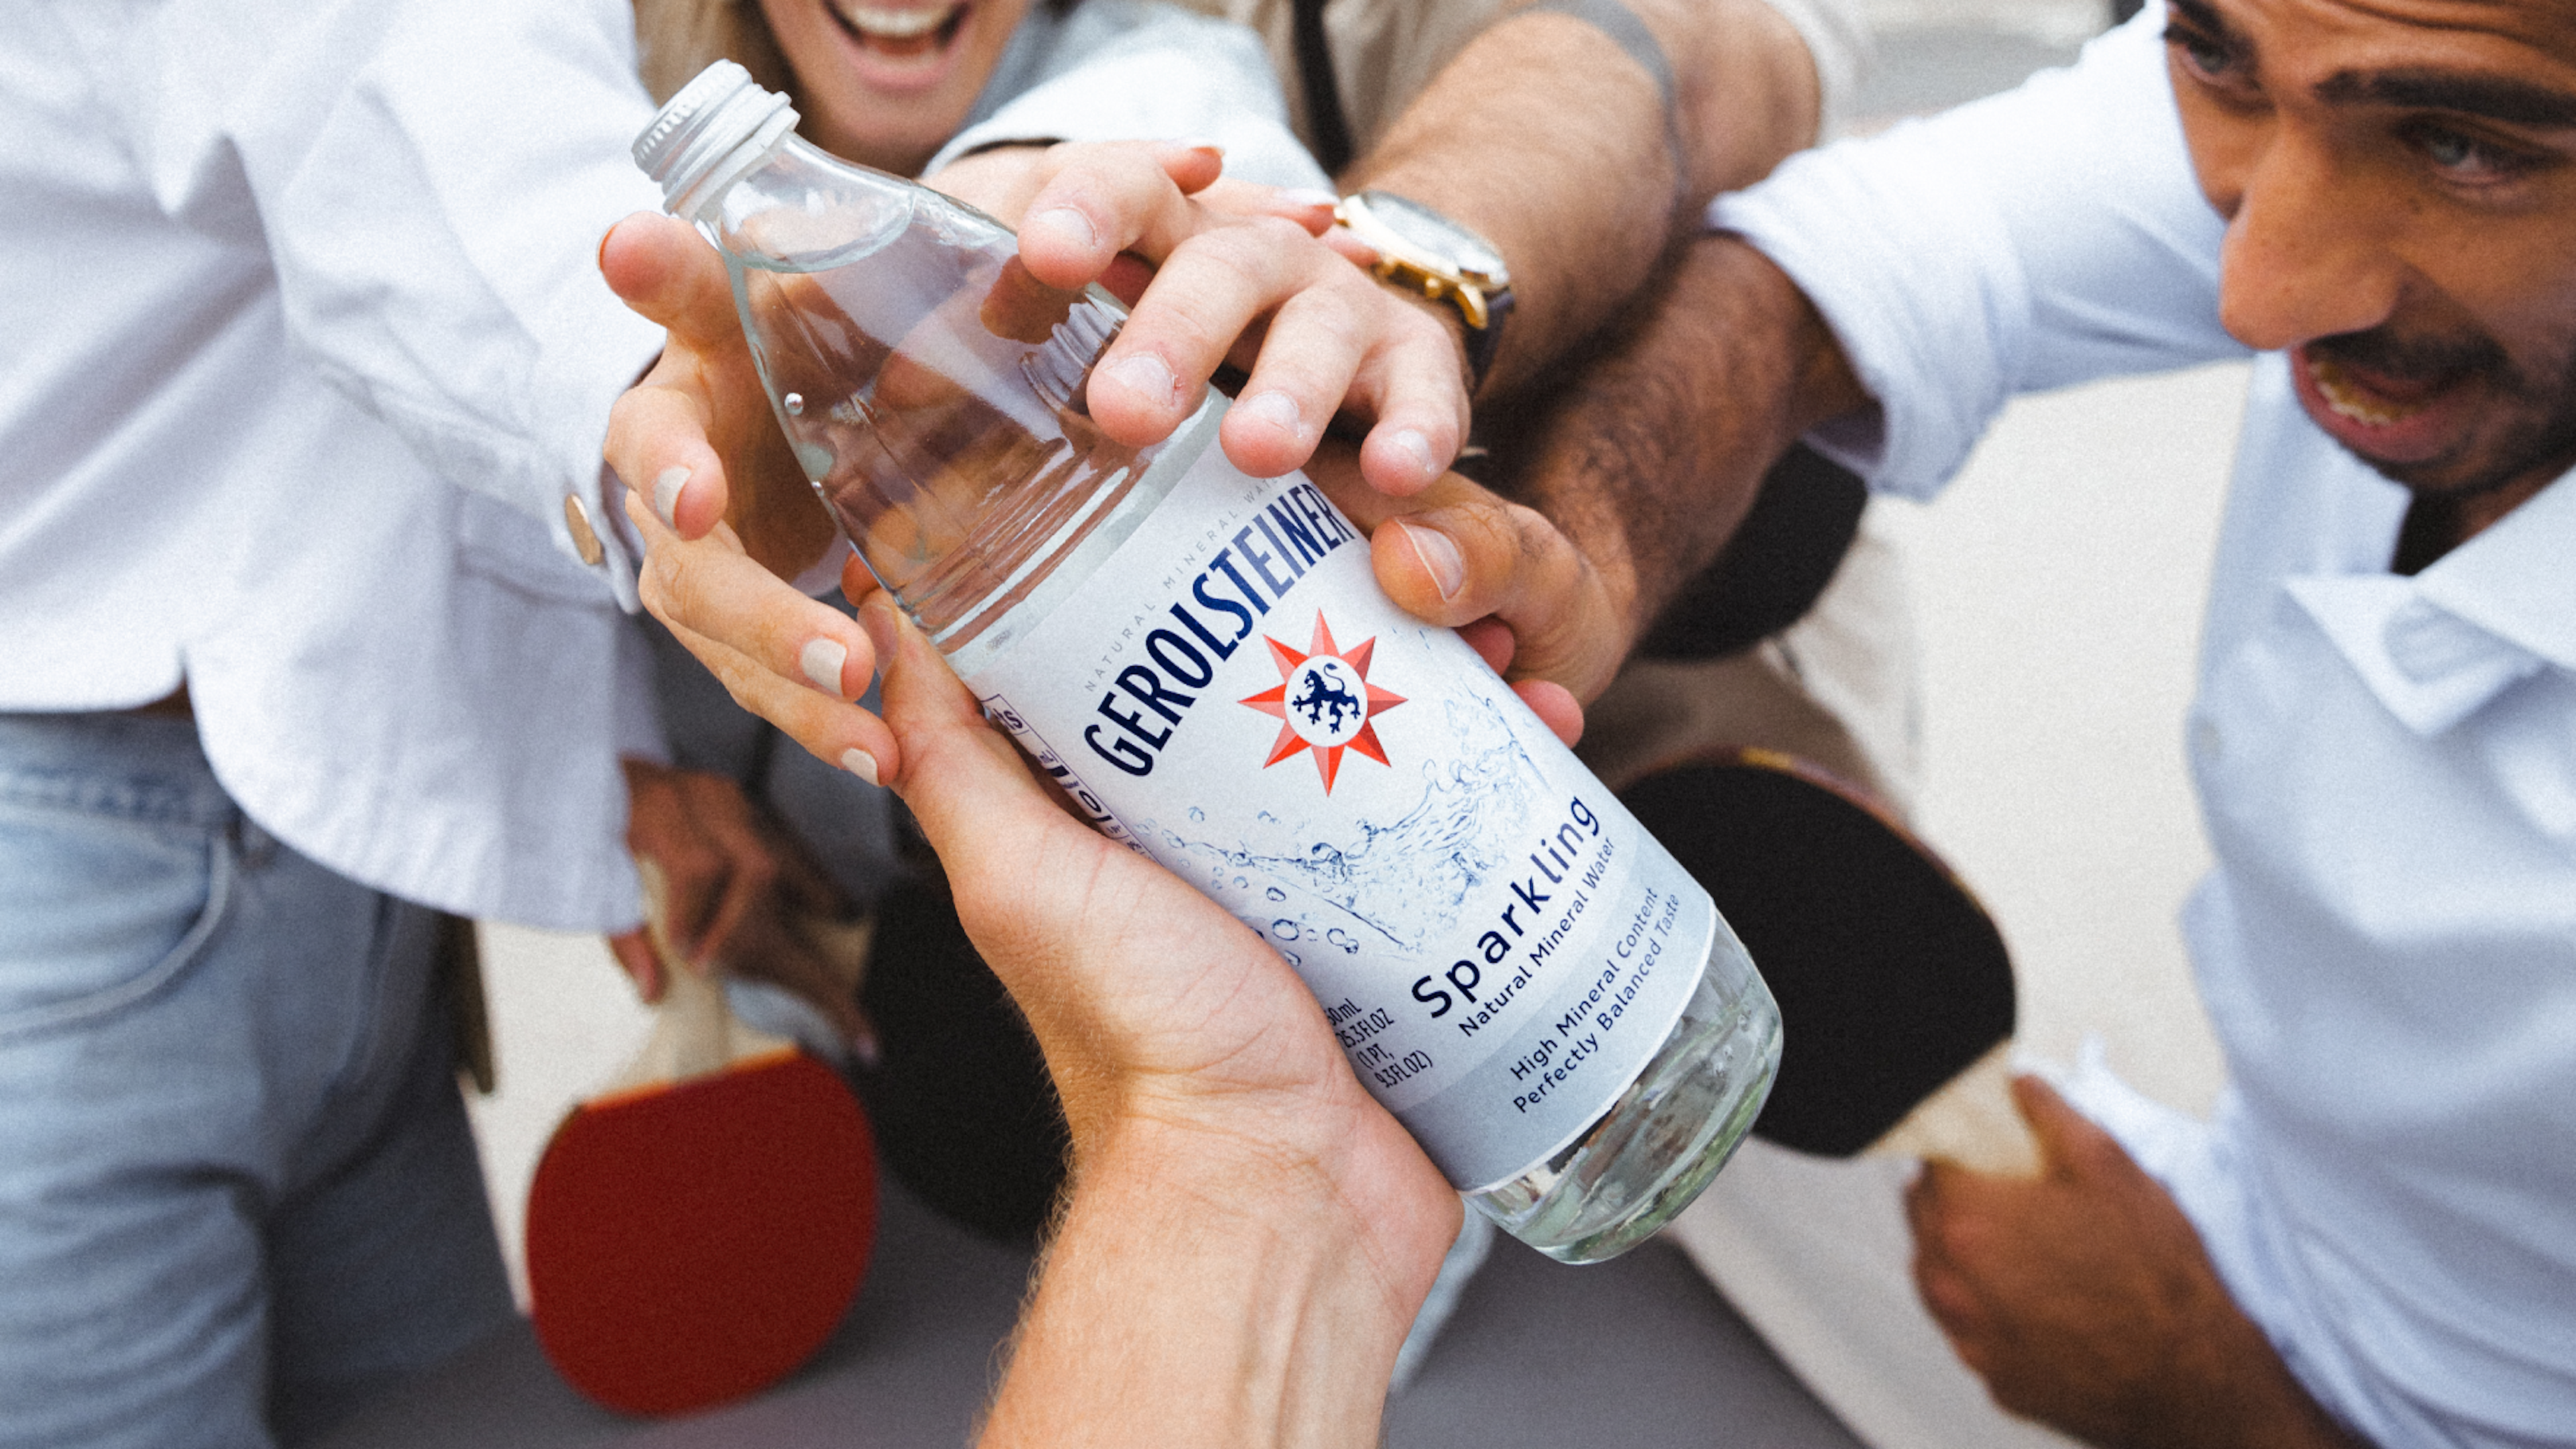 A group of people reach for a bottle of Gerolsteiner sparkling water.